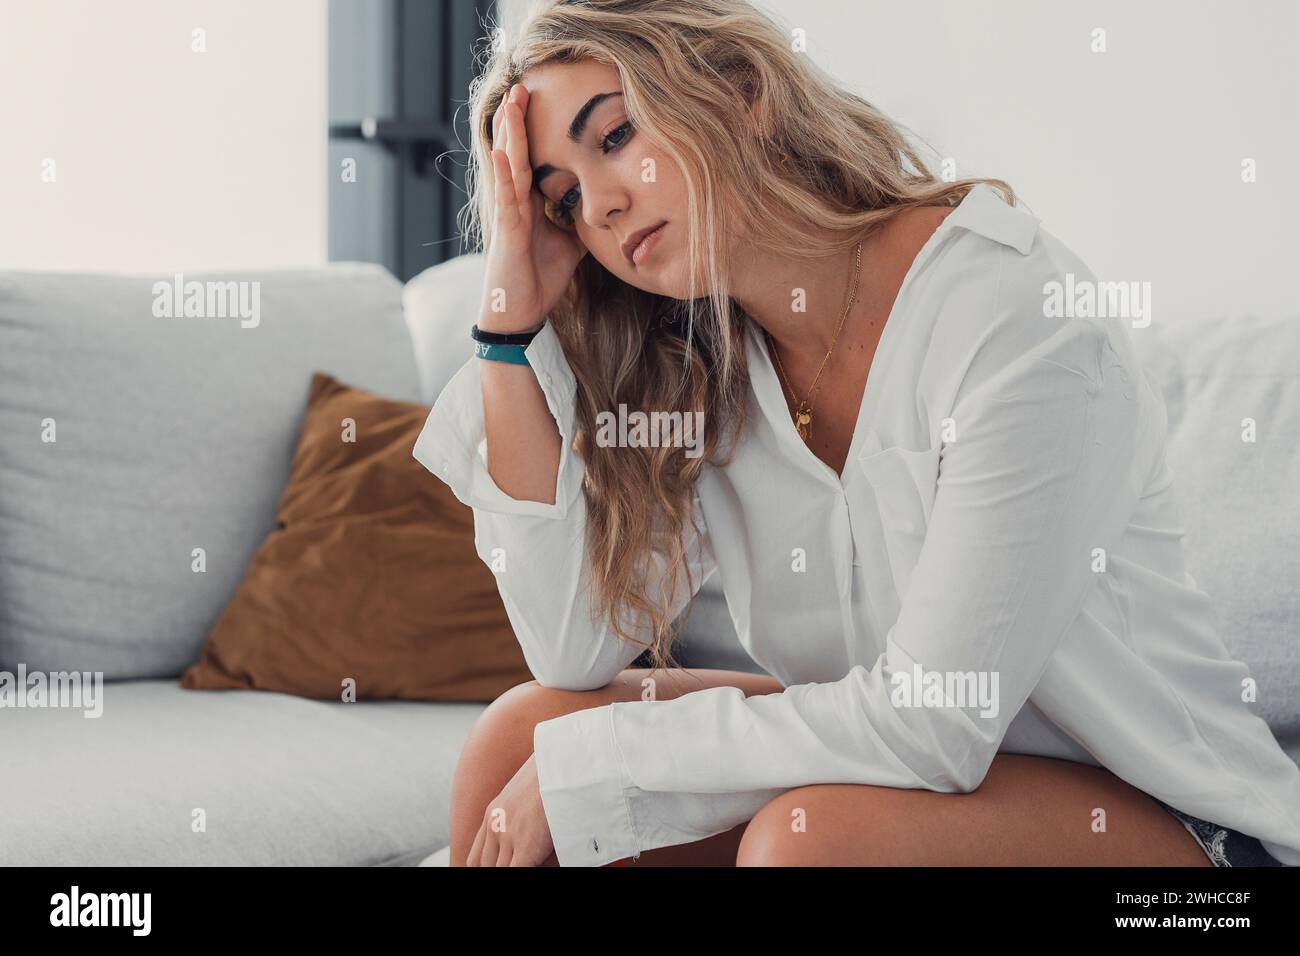 Close up tired woman after long sedentary work, exhausted girl feeling discomfort, unwell and unhealthy Stock Photo